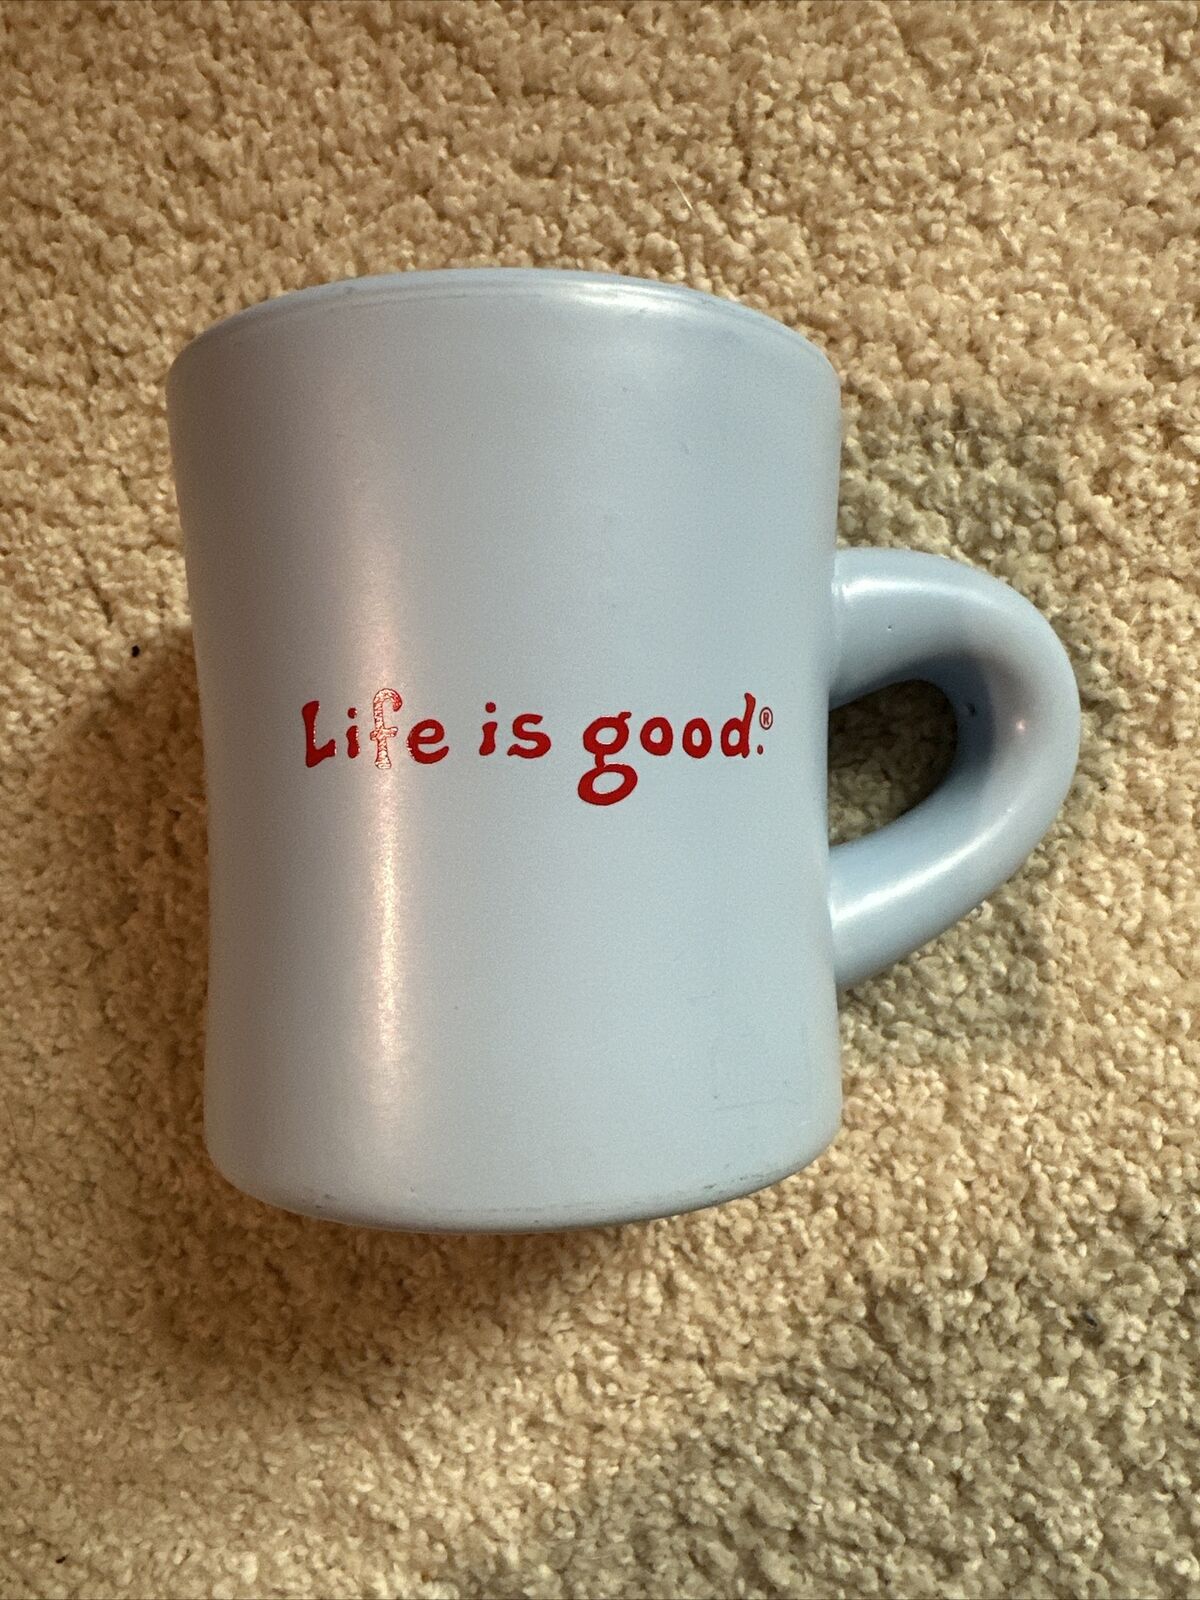 Life is Good Coffee Mug - Blue Cup Logo Text Silly - Good Home by Life is Good